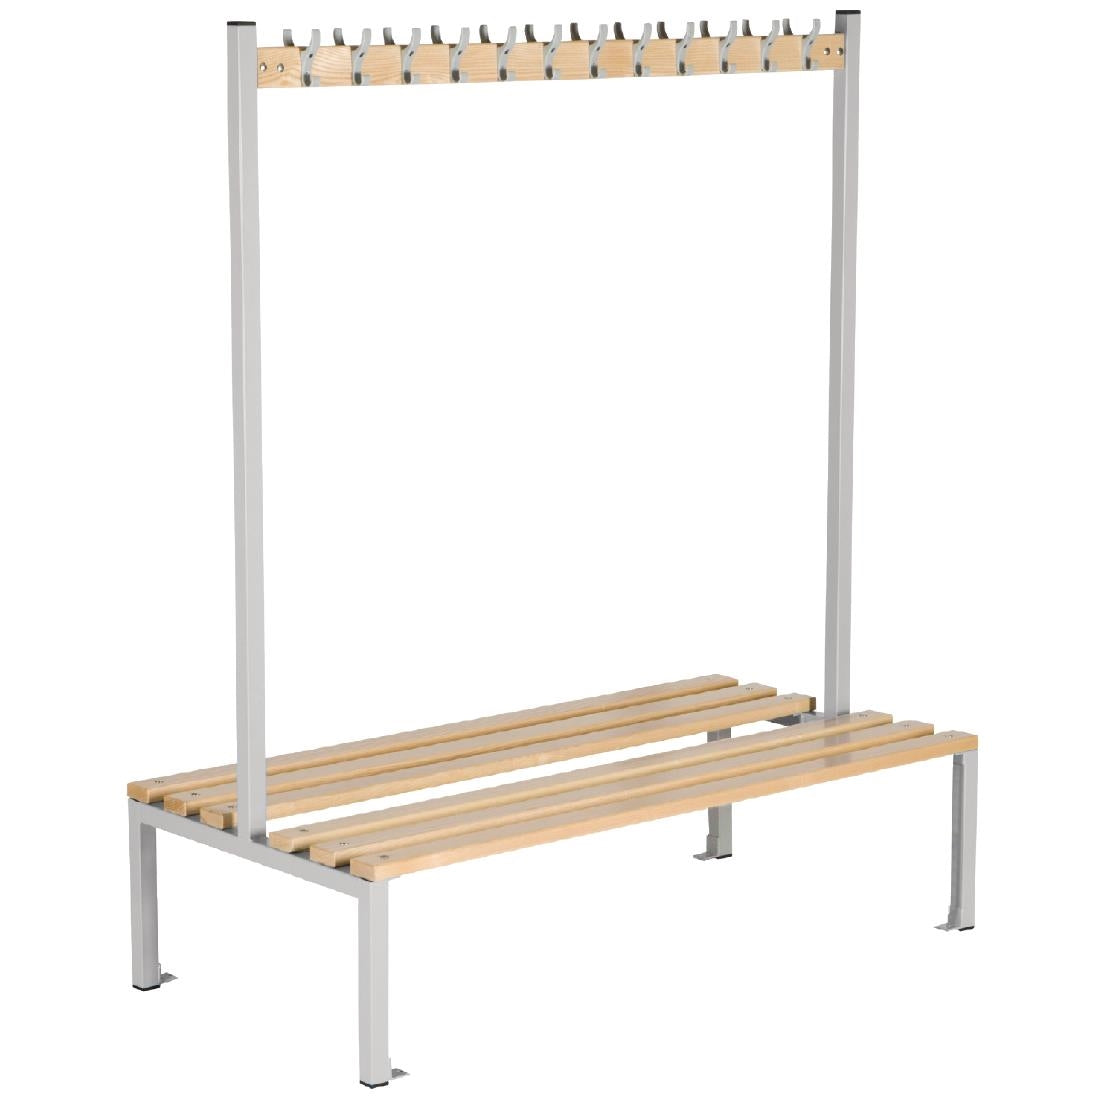 CF498 Double Sided Coat Hanger Bench 1500mm JD Catering Equipment Solutions Ltd